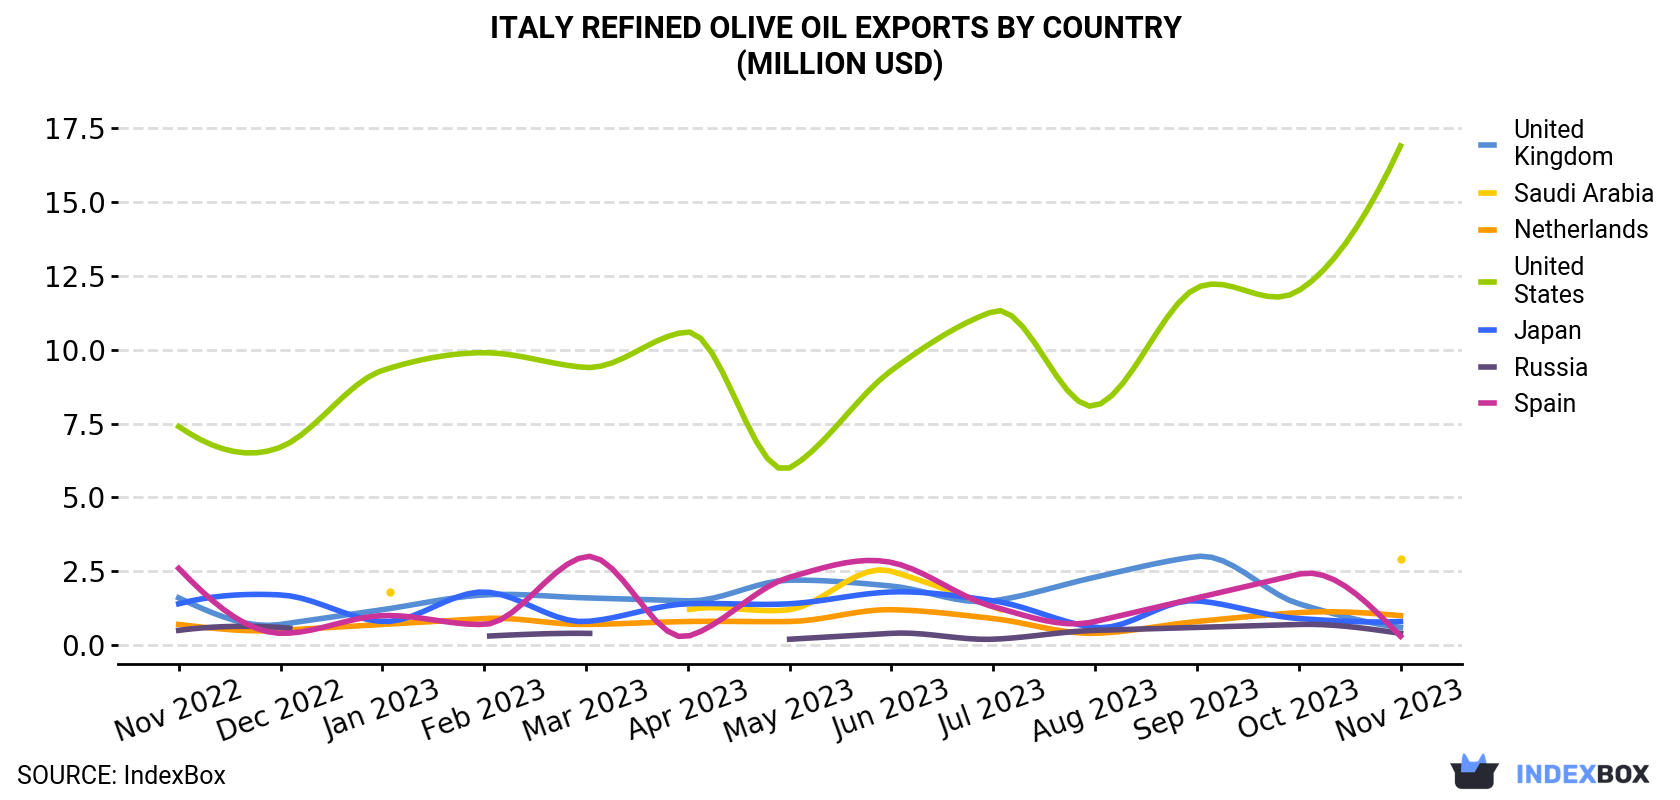 Italy Refined Olive Oil Exports By Country (Million USD)